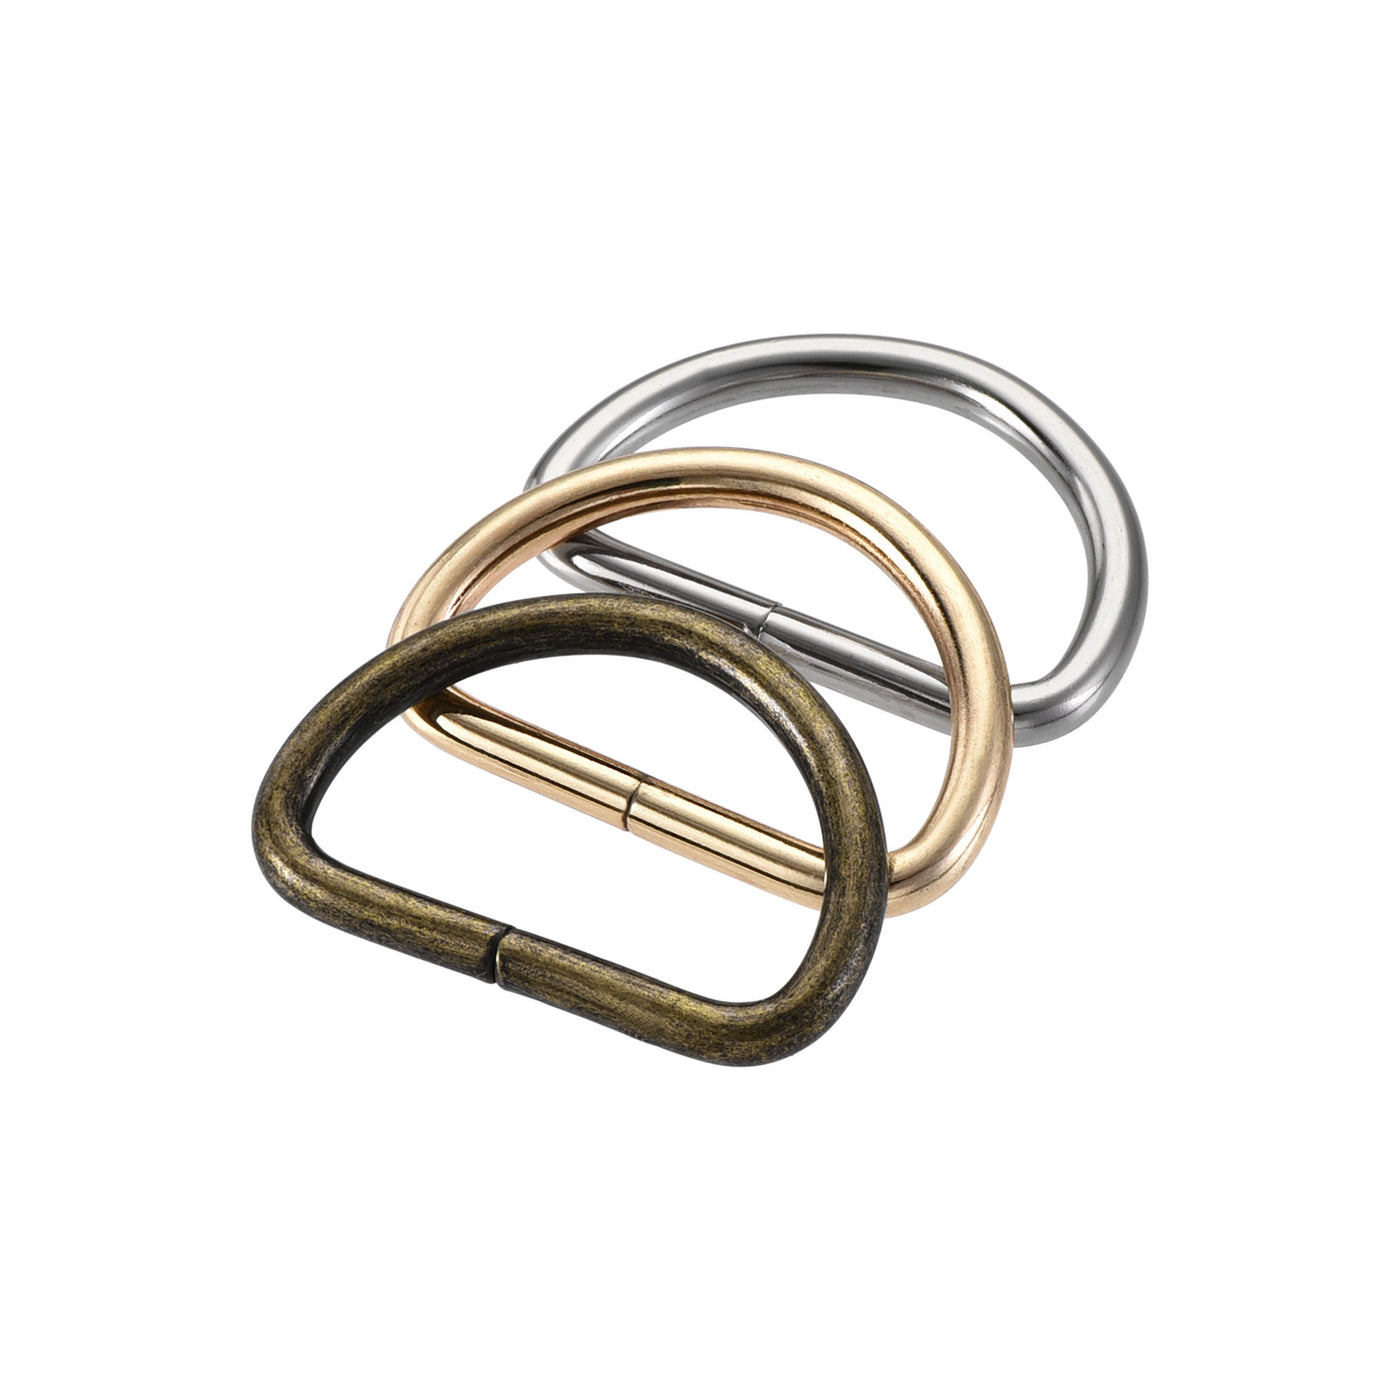 uxcell Uxcell Metal D Ring 1.26"(32mm) D-Rings Buckle Silver Tone, Gold Tone, Bronze Tone(Total 15pcs)